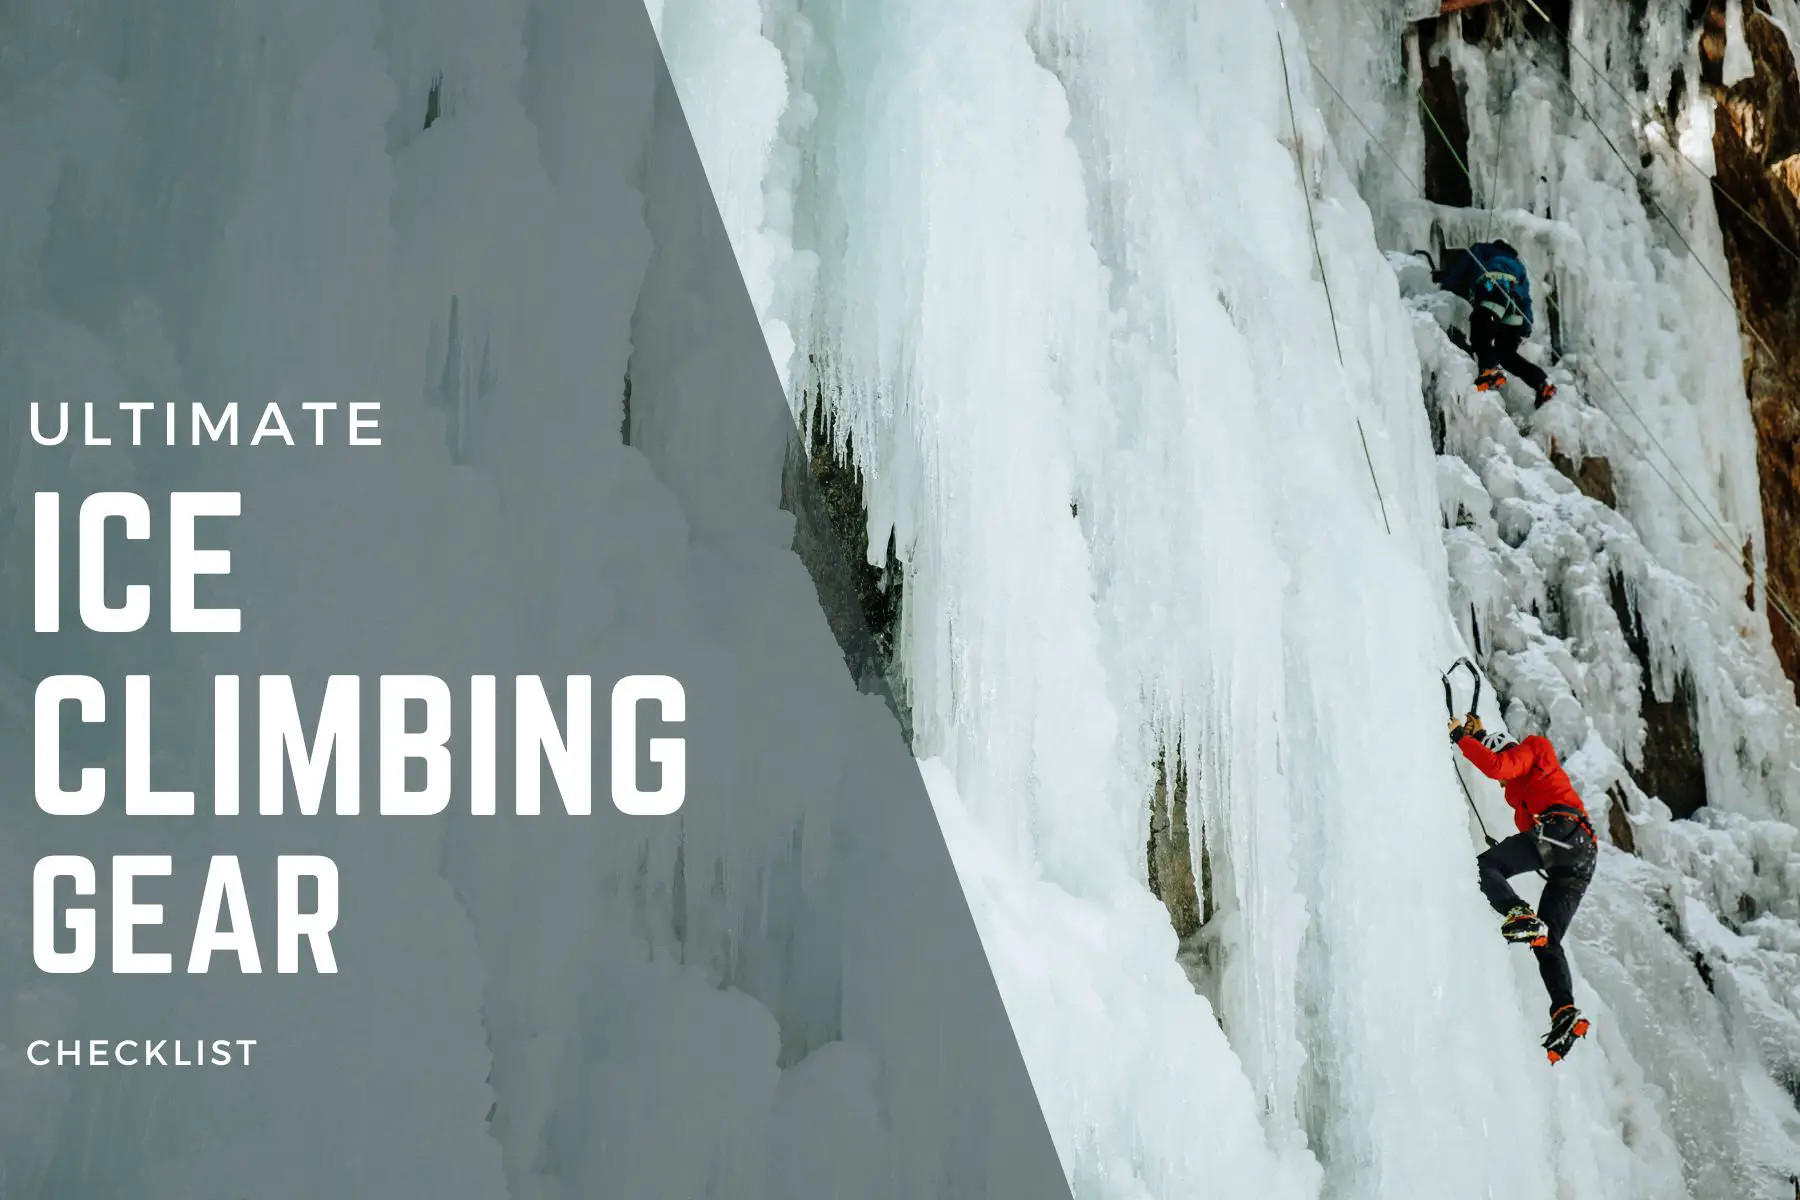 Blog post on the gear you need for ice climbing